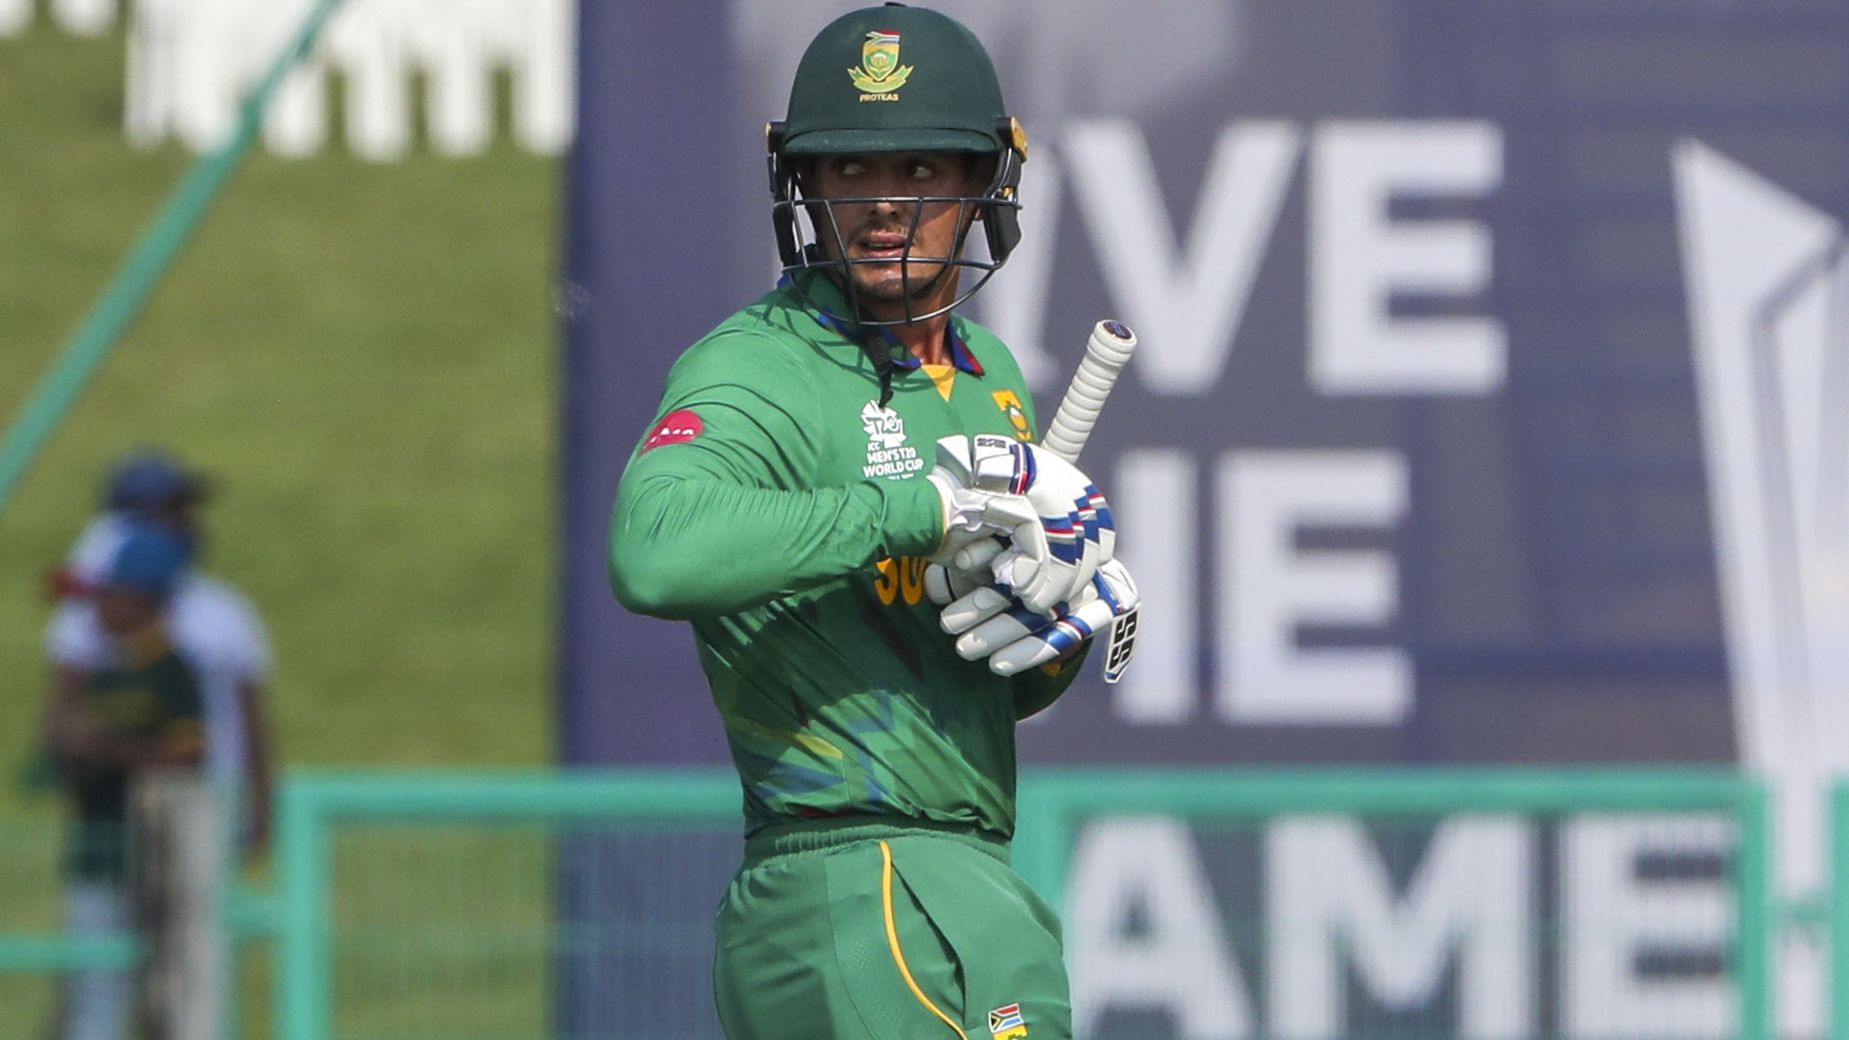 South Africa superstar Quinton de Kock withdraws from World Cup game, after directive to take a knee